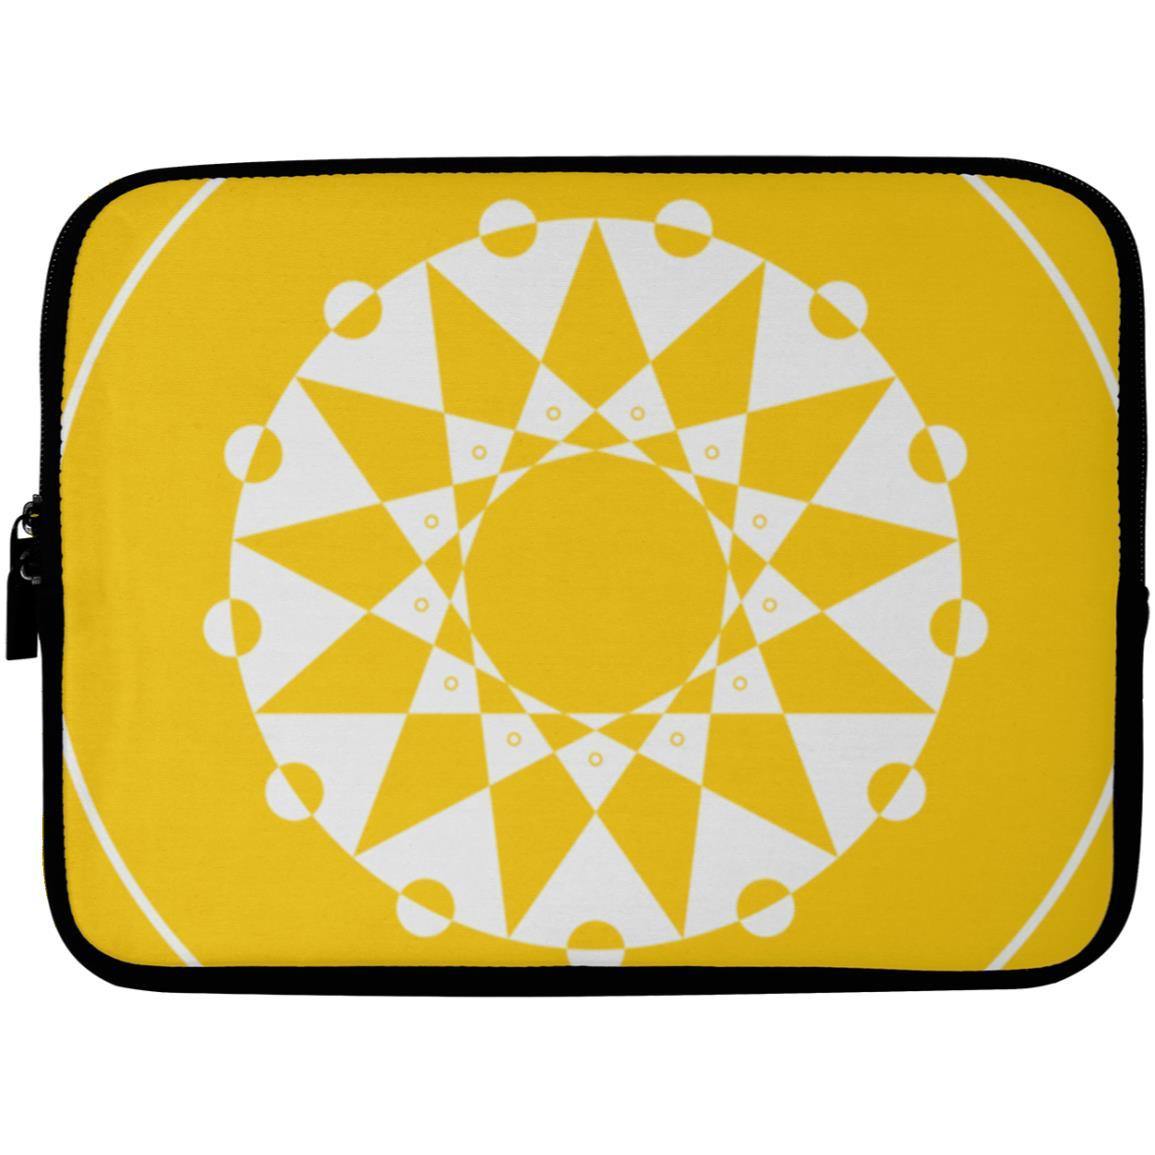 Crop Circle Laptop Sleeve - West Stowell - Shapes of Wisdom